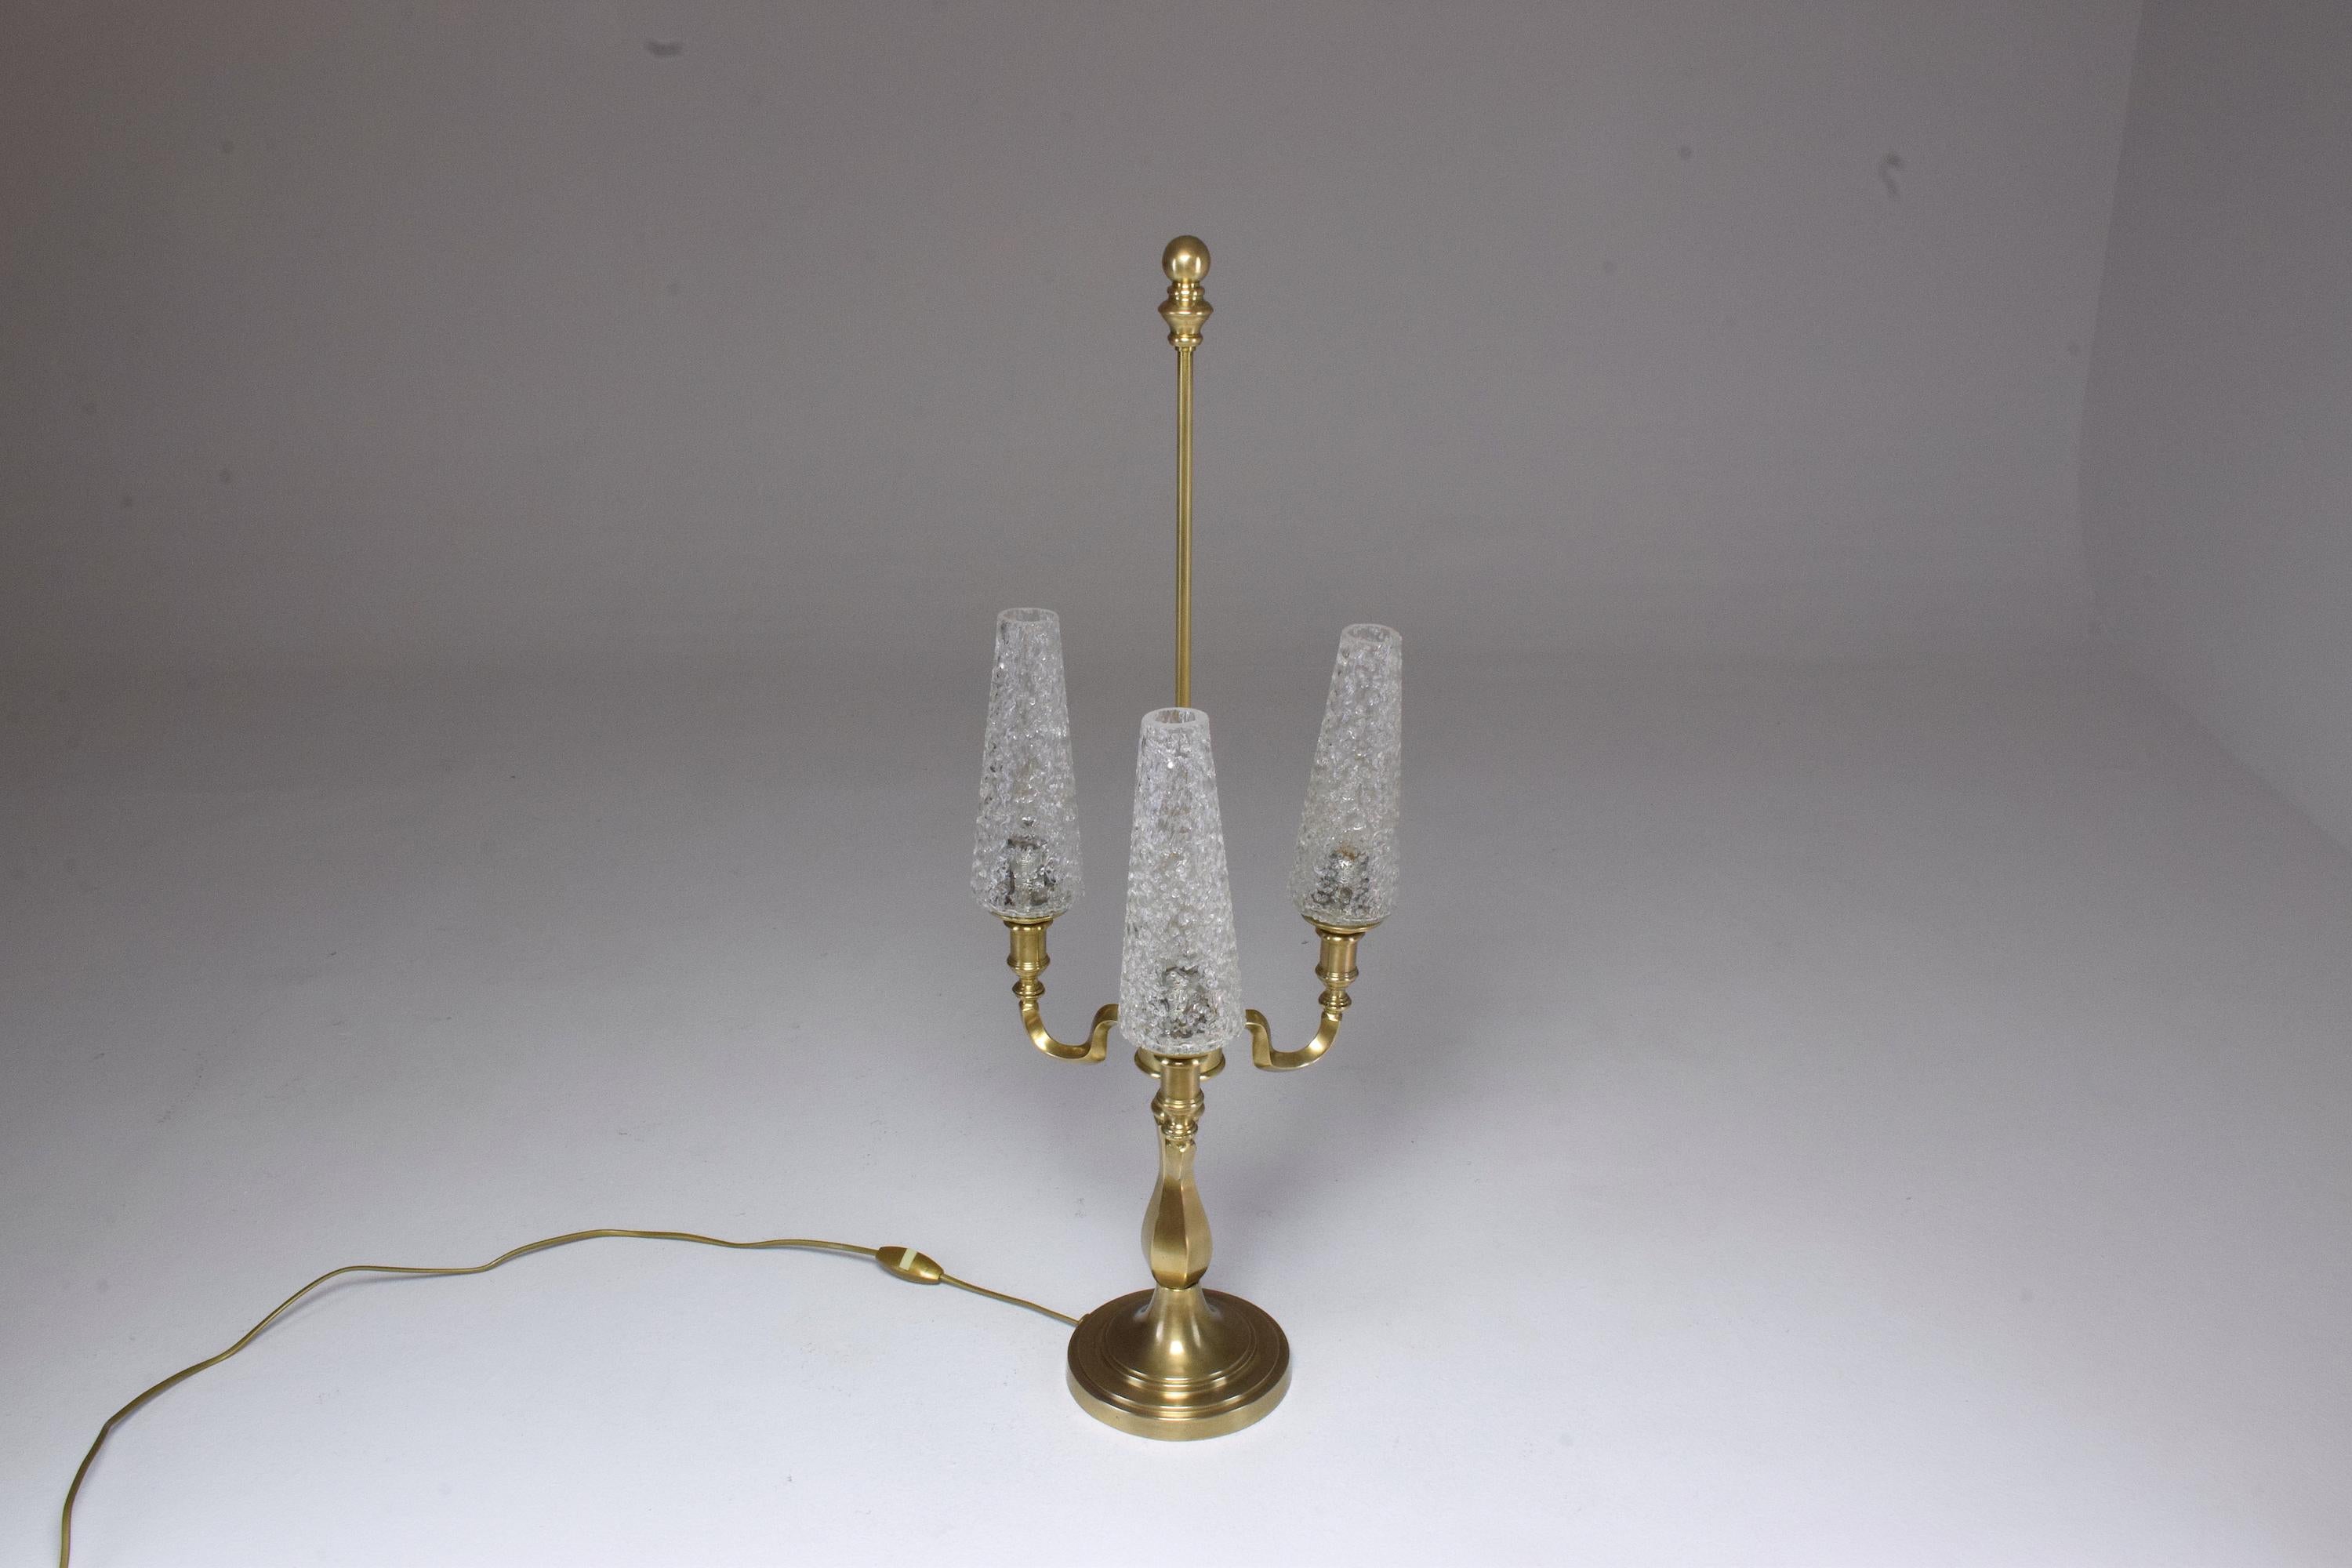 A 20th century vintage three-arm table lamp in Hollywood Regency style circa 1960s-1970s built with a heavy solid polished brass cast base and composed of its original three crackle glass shades which are screwed with metallic inserts. This striking